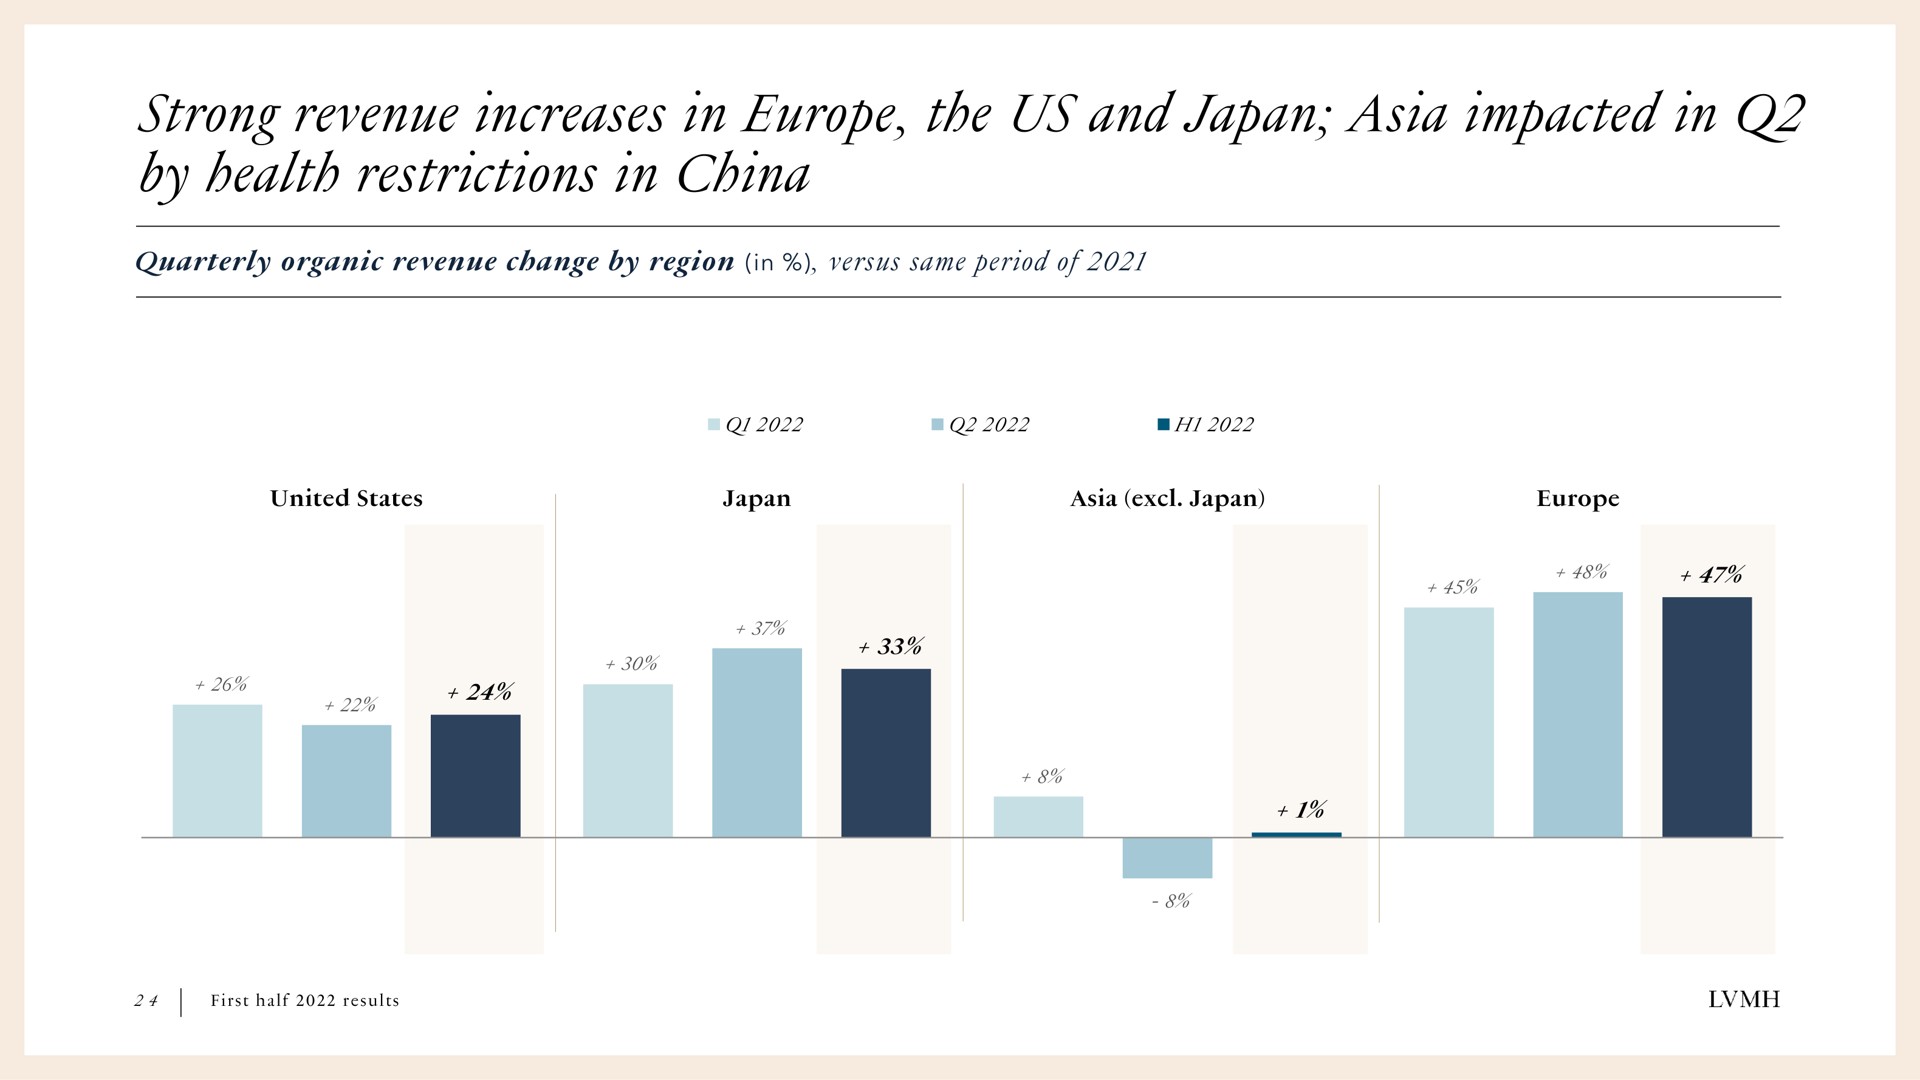 strong revenue increases in the us and japan impacted in by health restrictions in china | LVMH